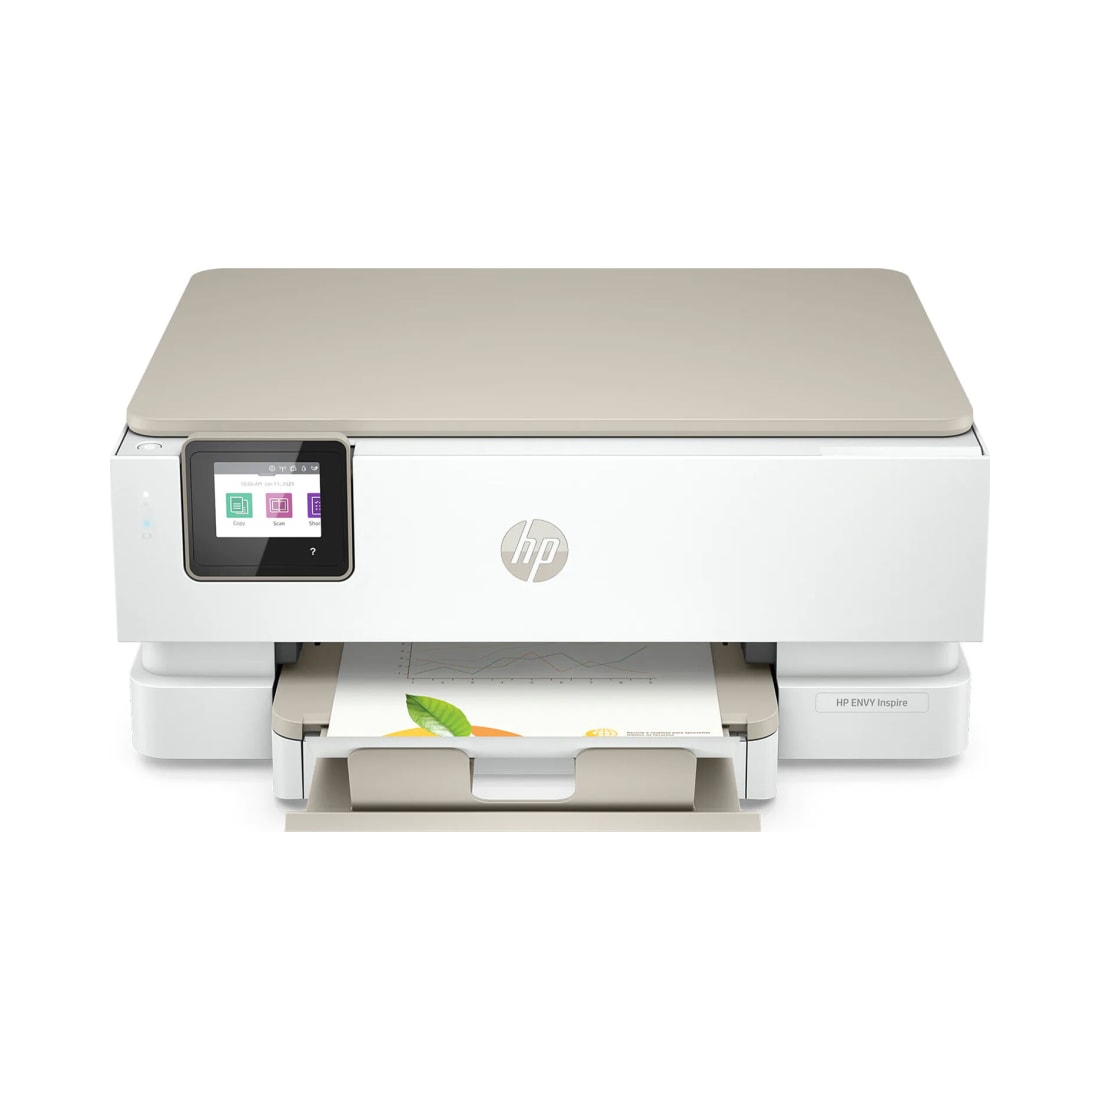 HP ENVY INSPIRE 7255E All-in-One Inkjet Printer - 1W2Y9AB1H